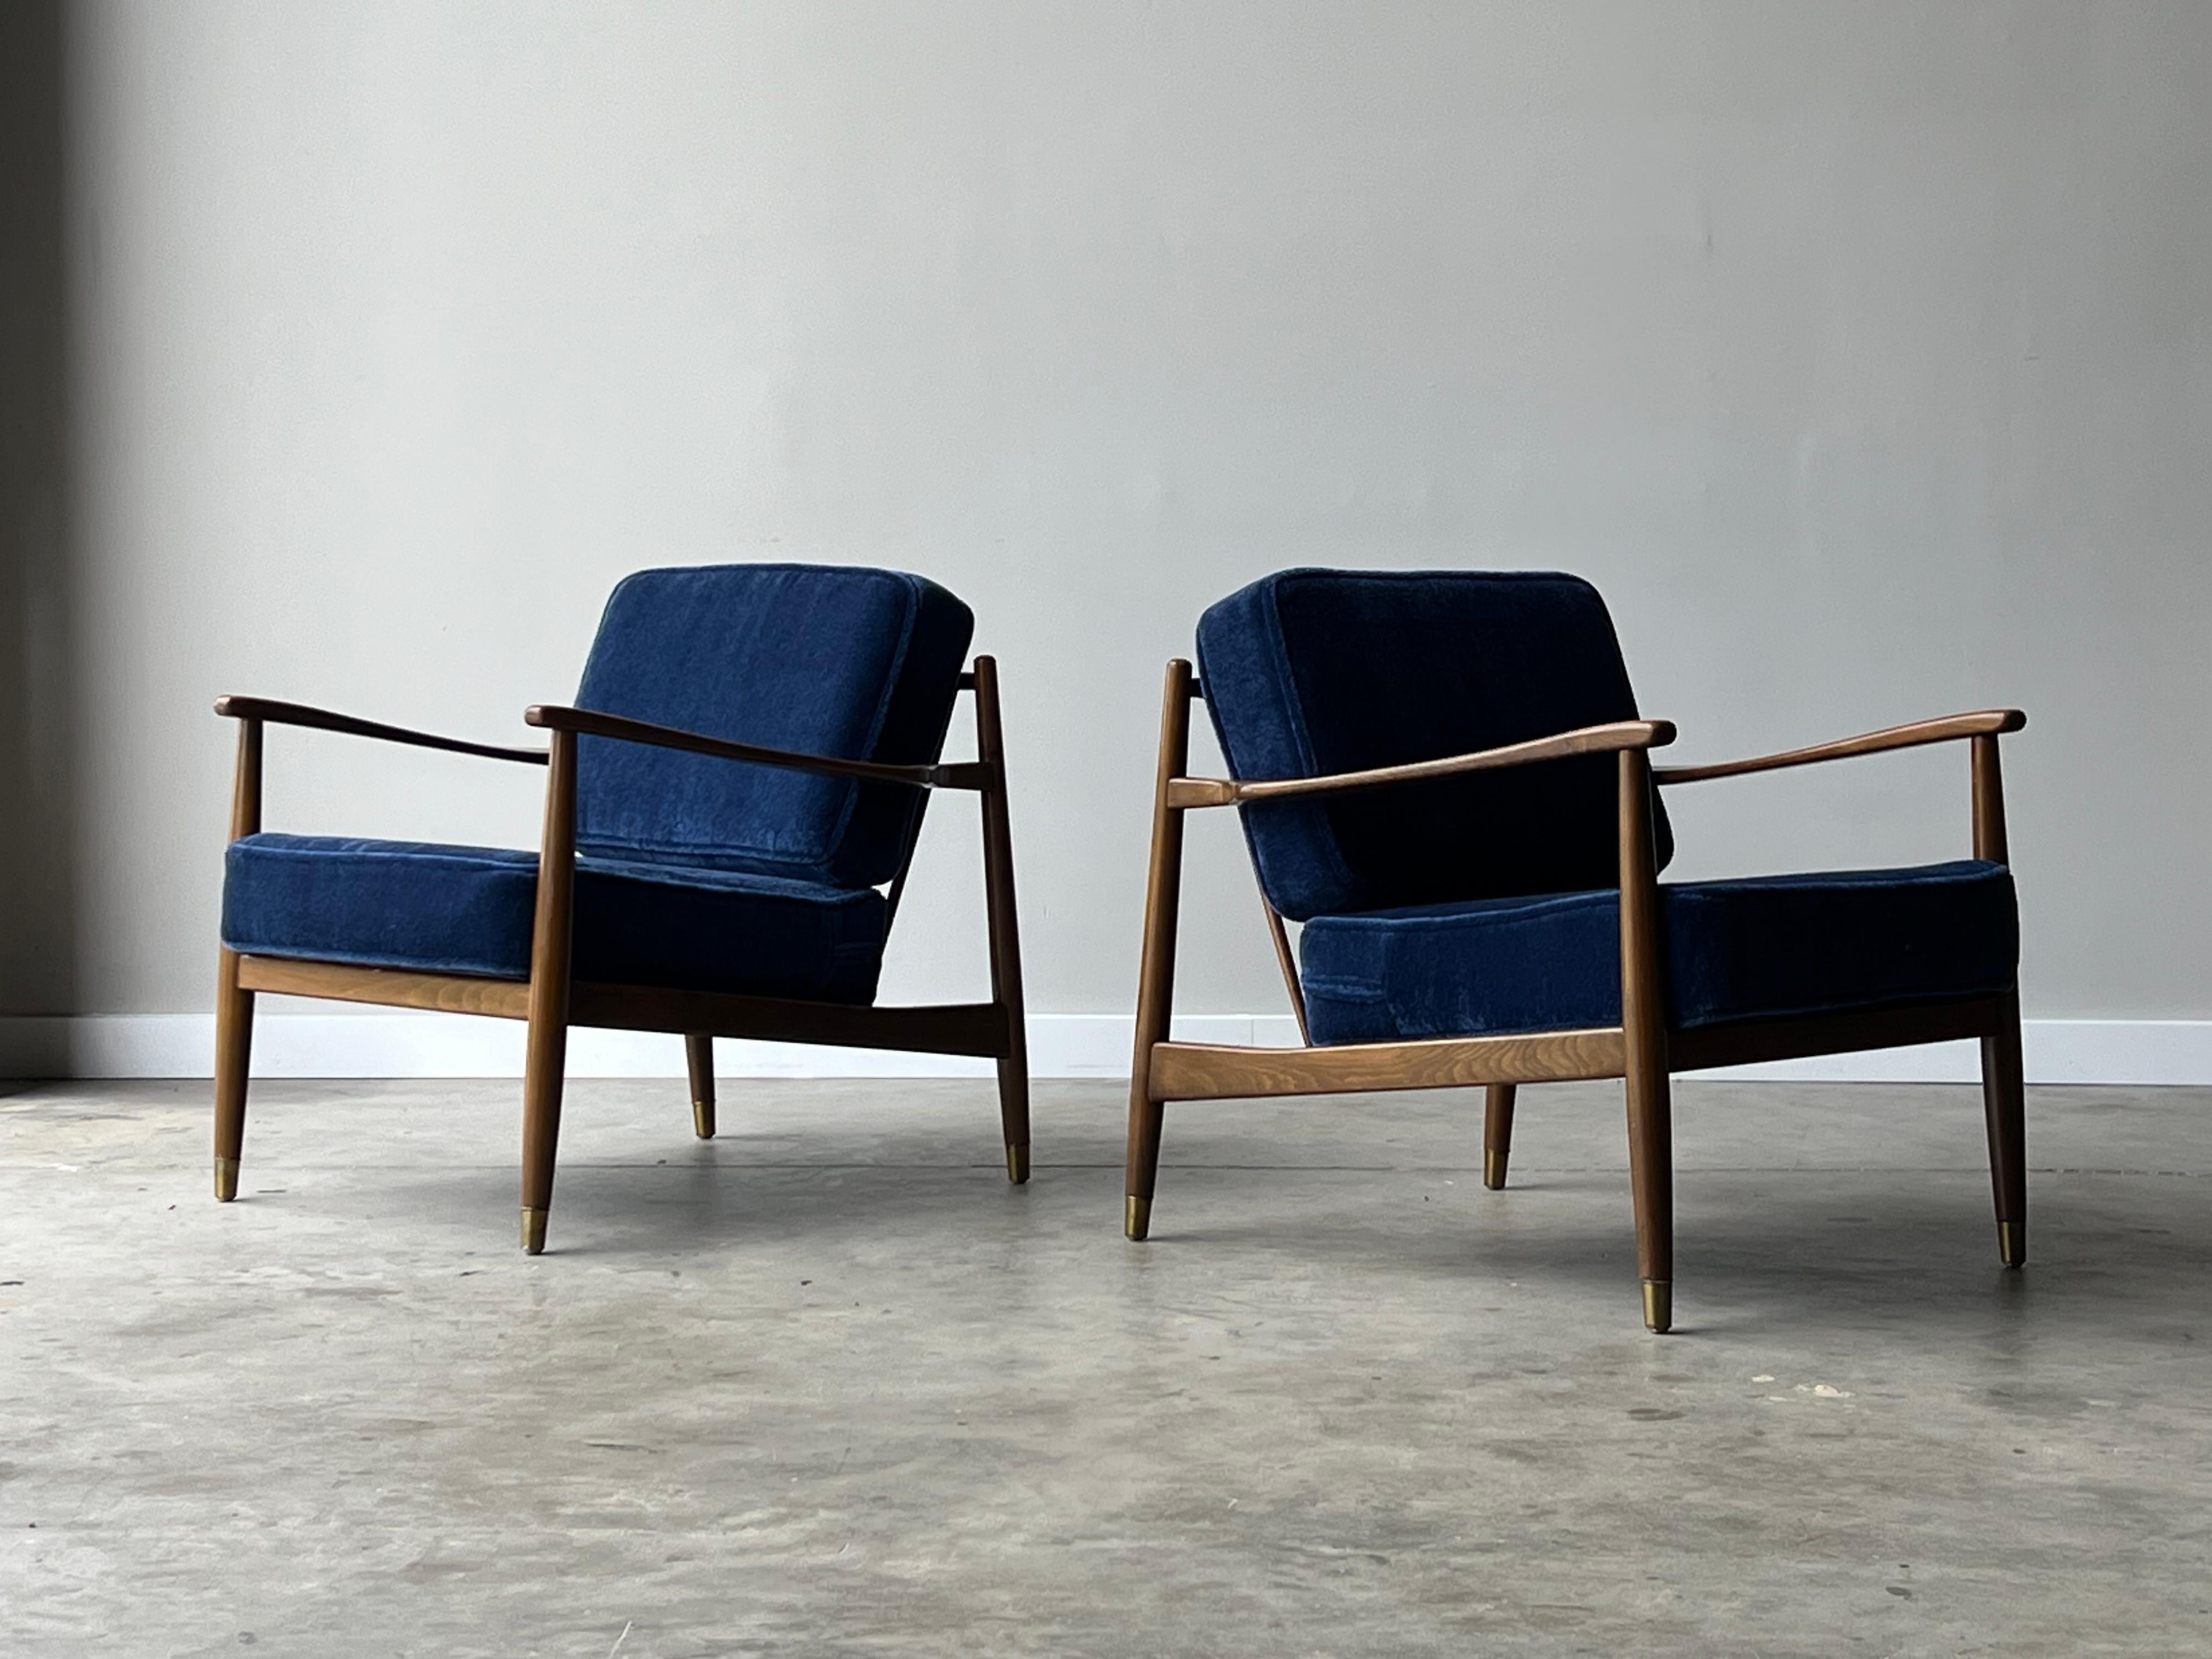 Designed by Folke Ohlsson for Dux and made in Sweden circa 1960s. New foam and beautiful blue Mohair fabric. Thick, soft, and extremely comfy. Sleek and low profile pair of Dux lounges with spindle backs and brass feet. A wonderful pair for many